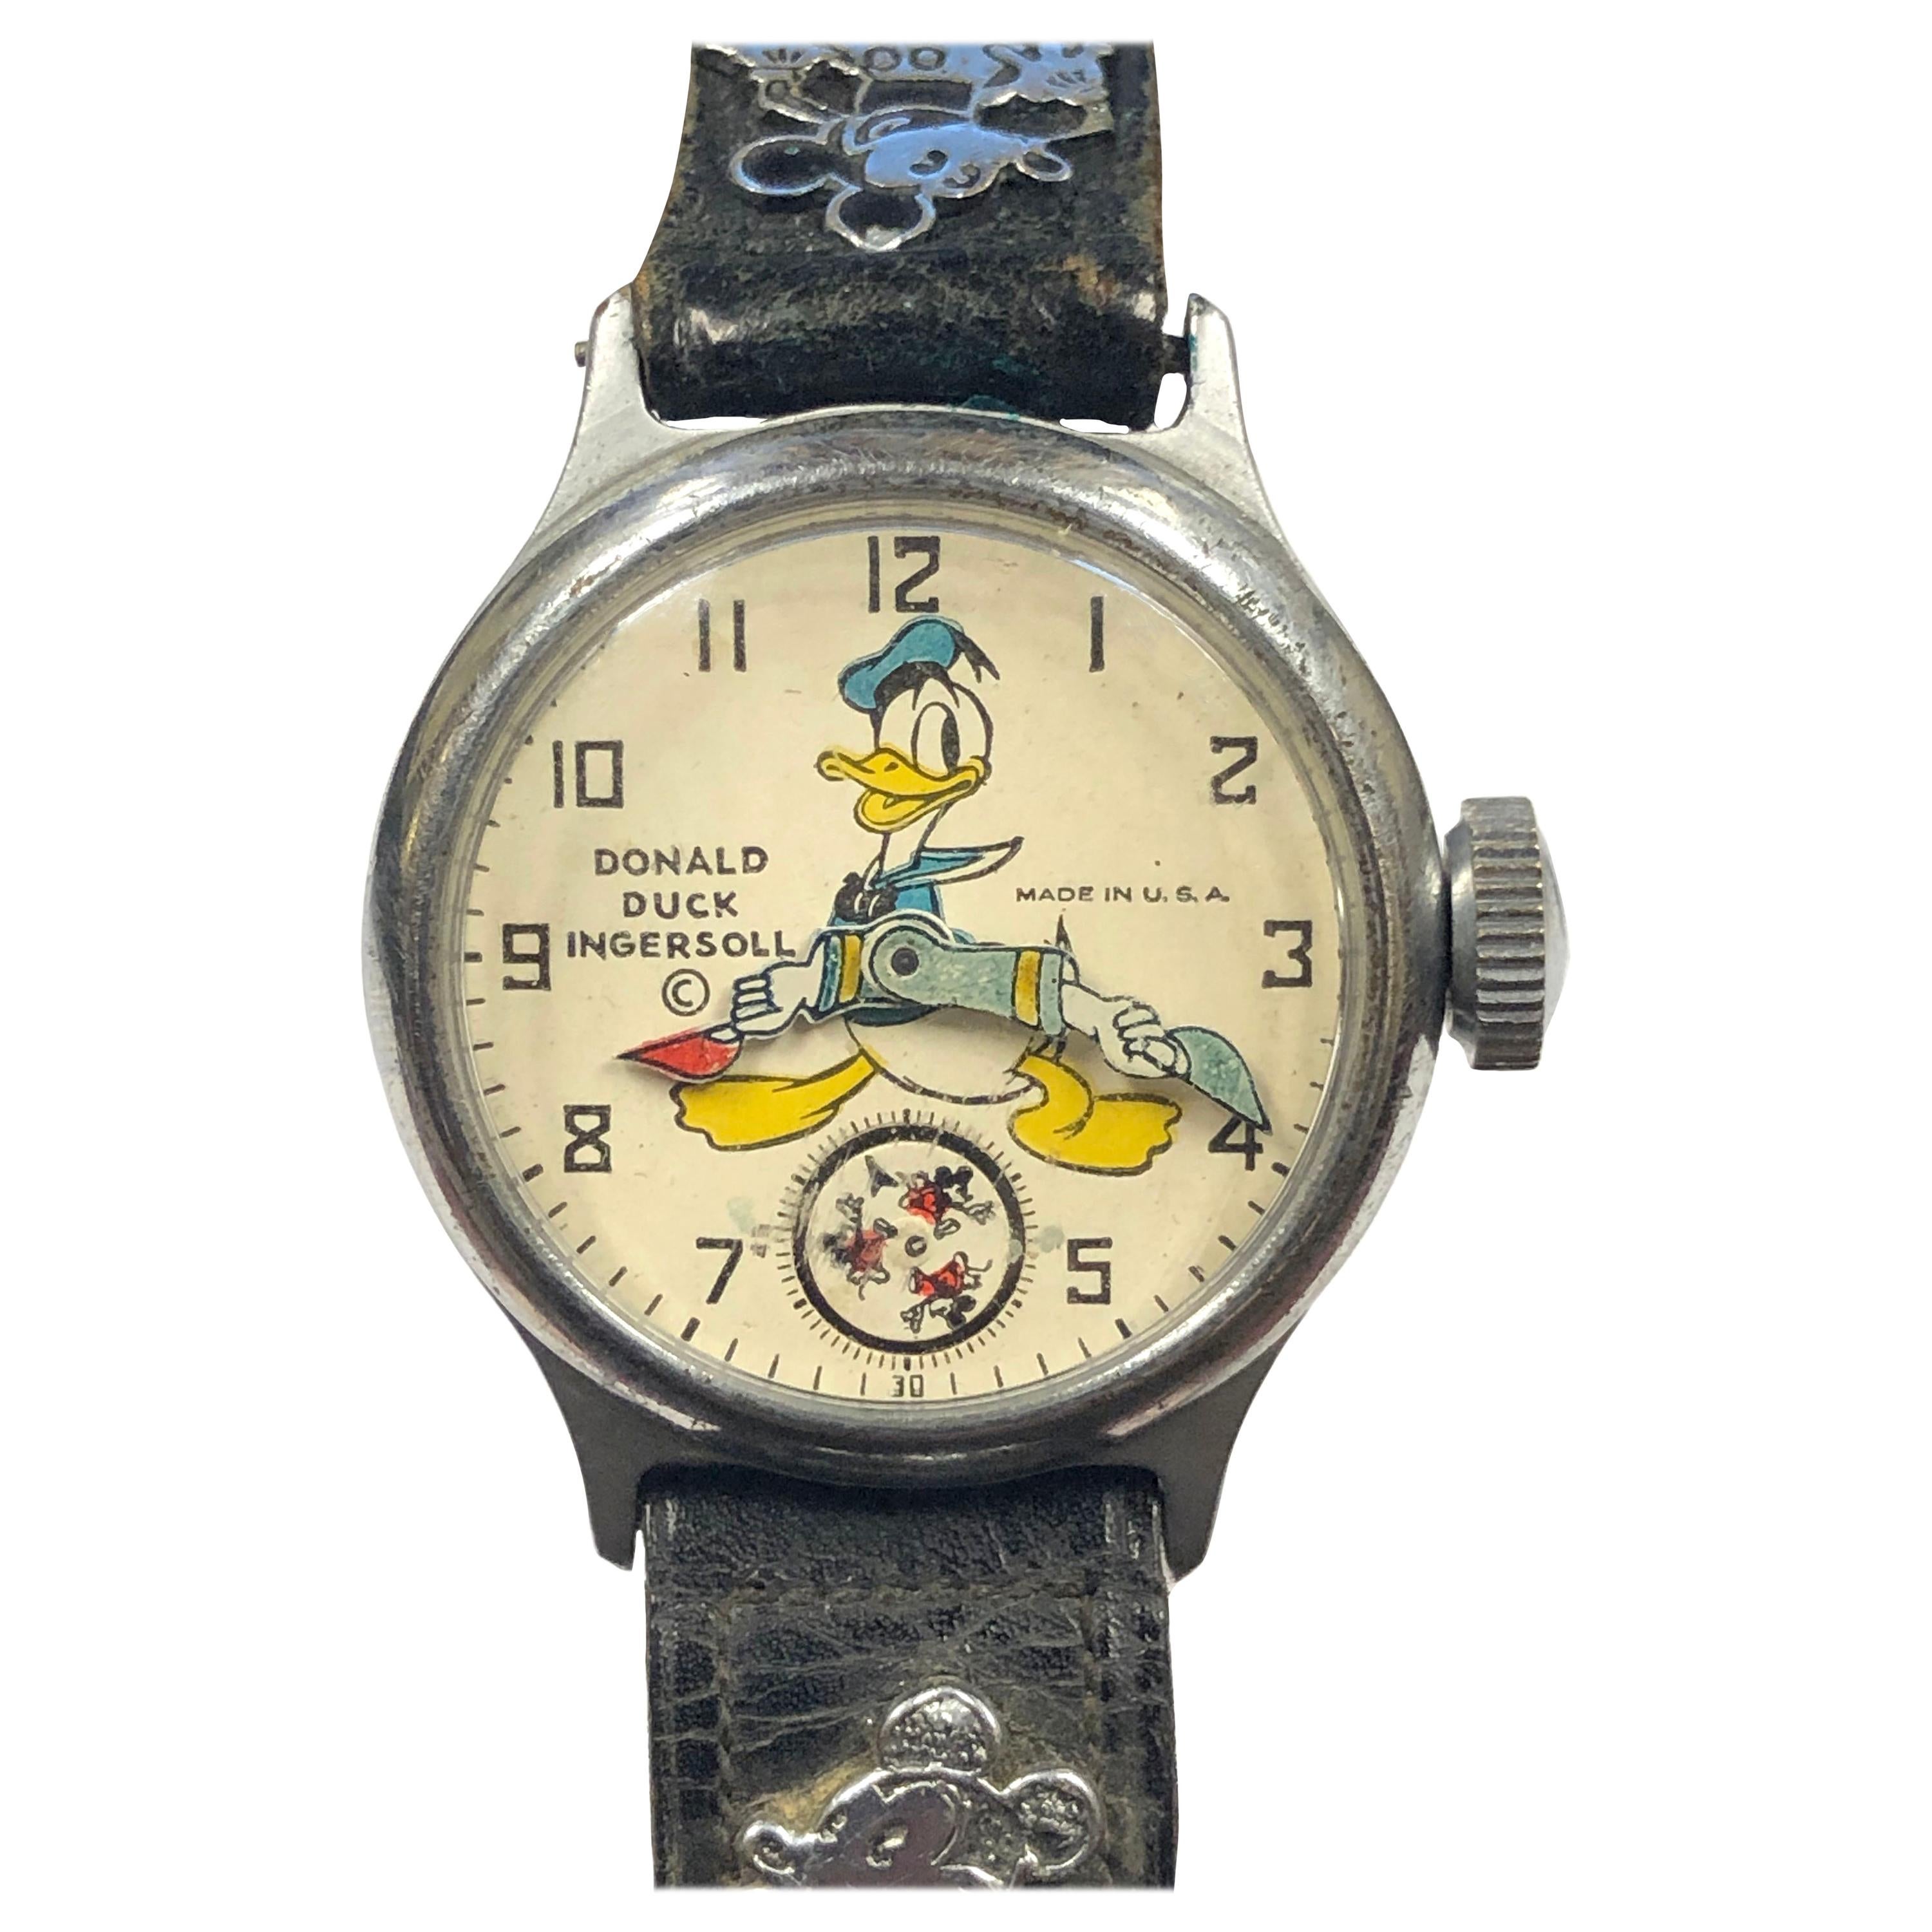 1930s Donald Duck Ingersoll Rare Mechanical Wristwatch For Sale at 1stDibs  | vintage donald duck watch, donald duck wrist watch, ingersoll donald duck  watch